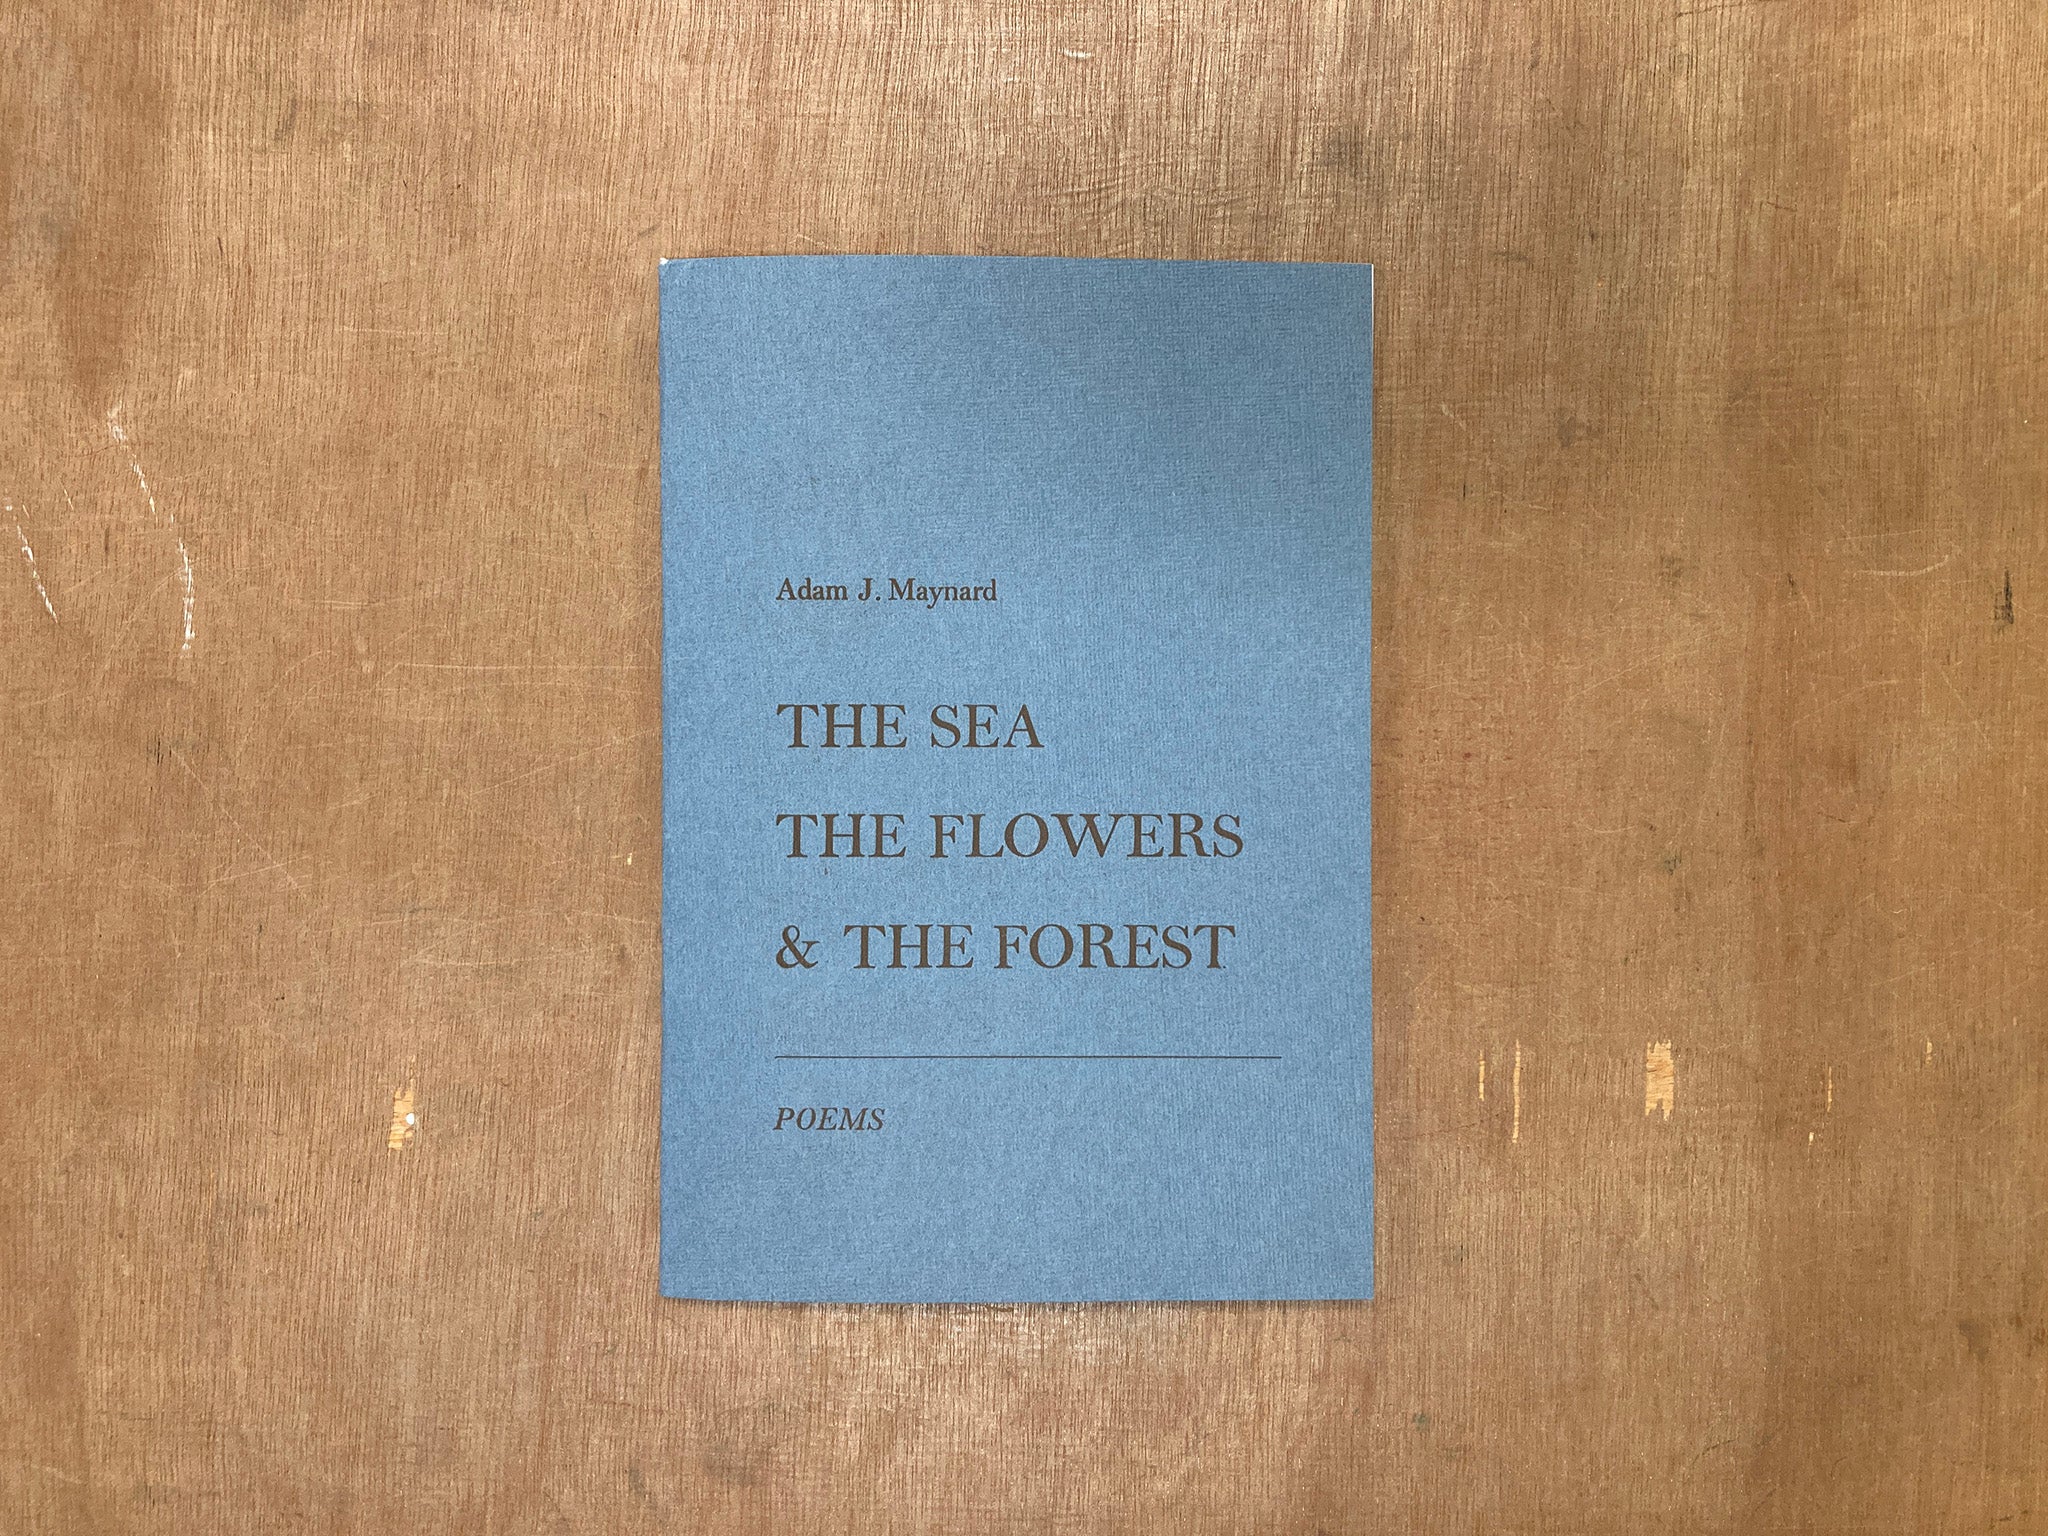 THE SEA, THE FLOWERS AND THE FOREST by Adam J. Maynard